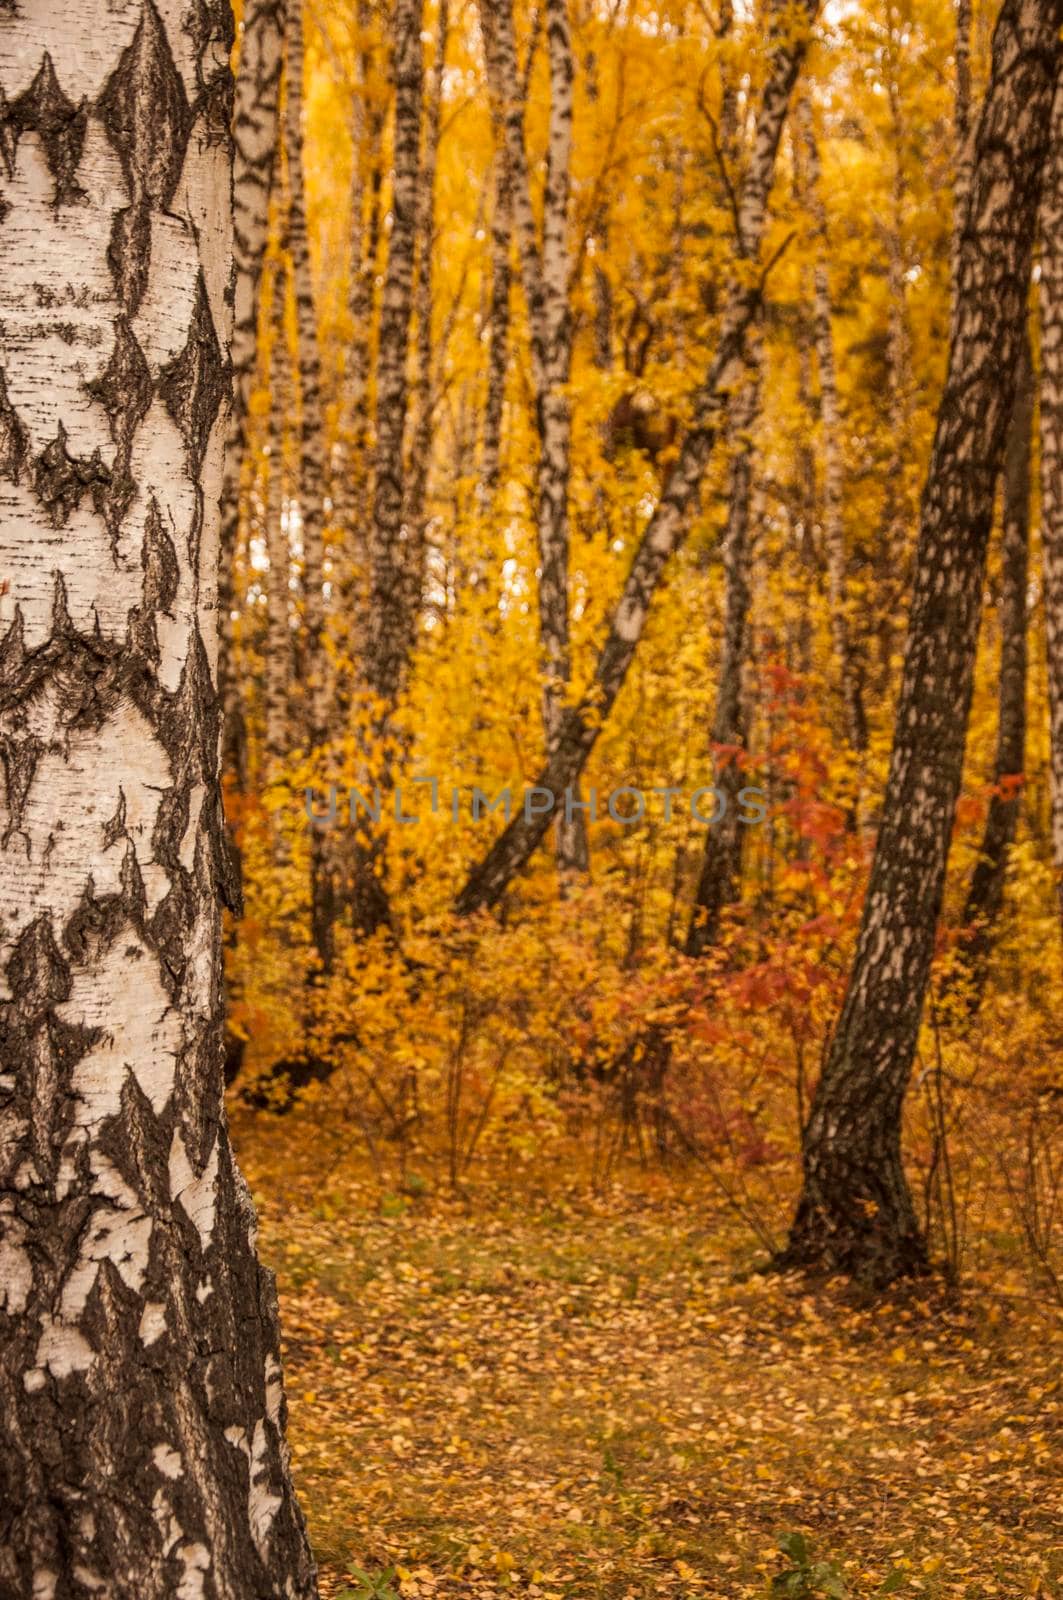 Autumn scenery. Beautiful scene with birches in yellow autumn birch forest in october among other birches in birch grove by inxti